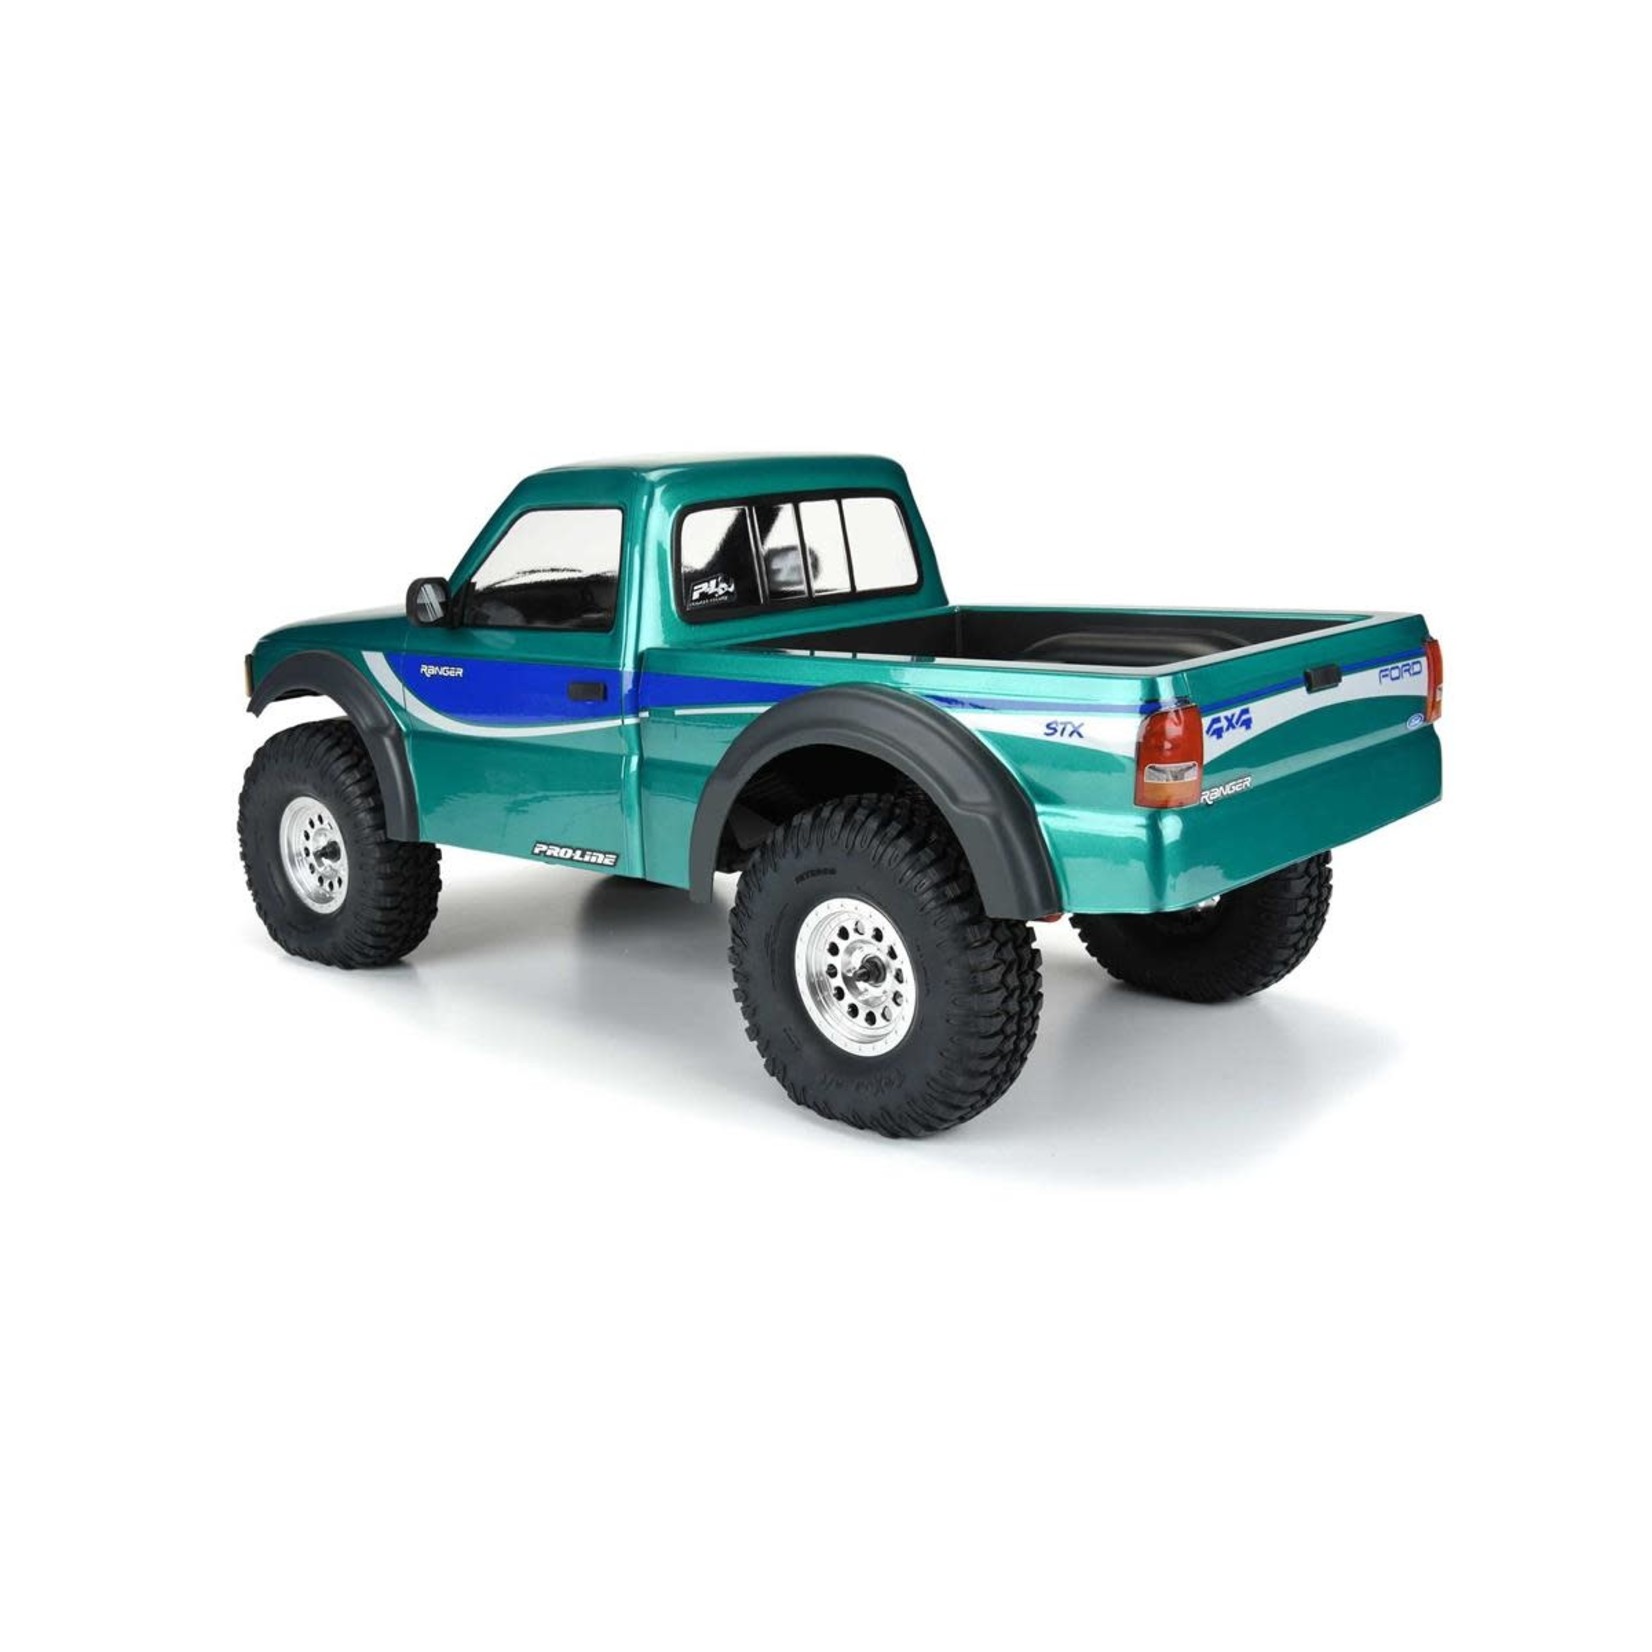 Pro-Line Pro-Line 1993 Ford Ranger 12.3" Crawler Body (Clear) #3537-00